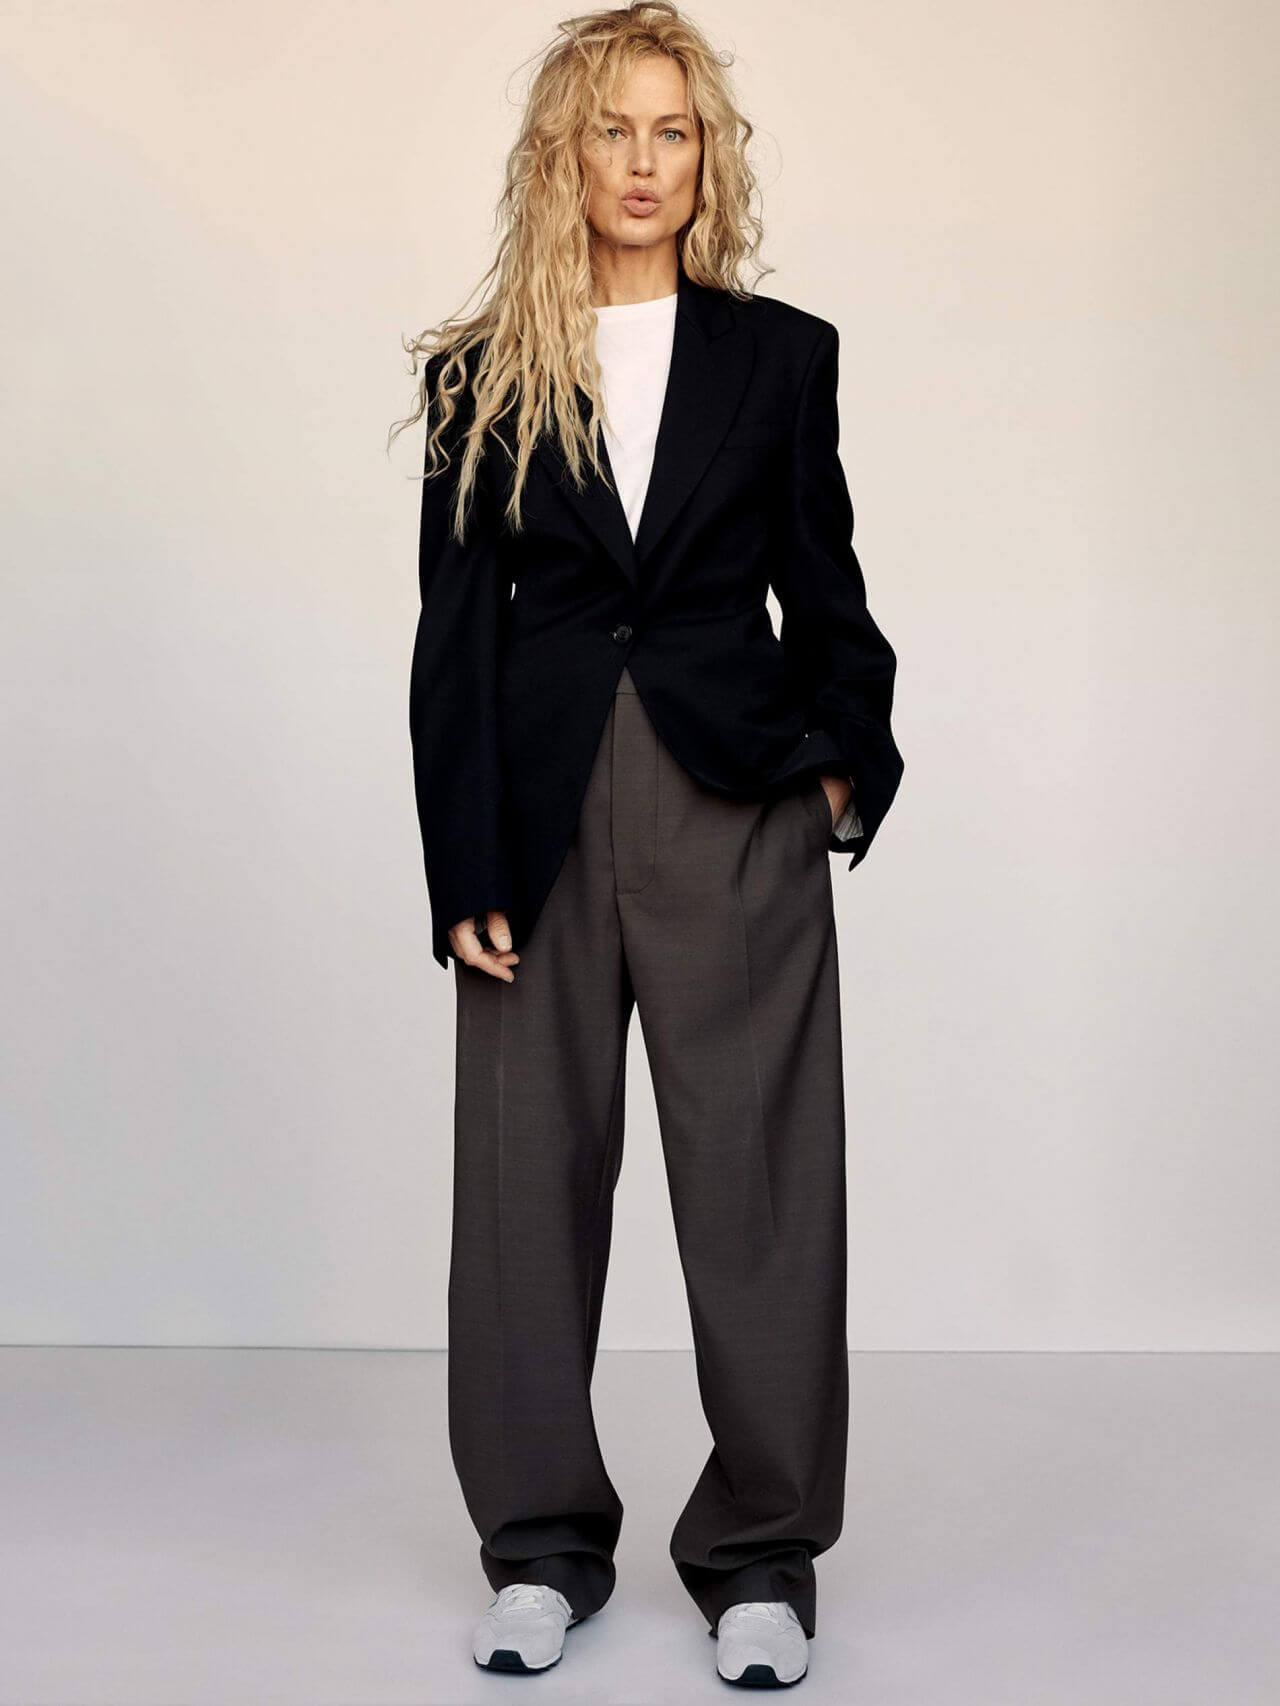 Carolyn Murphy  In Black Blazer Under White Top With Pants At The Edit by Net-A-Porter